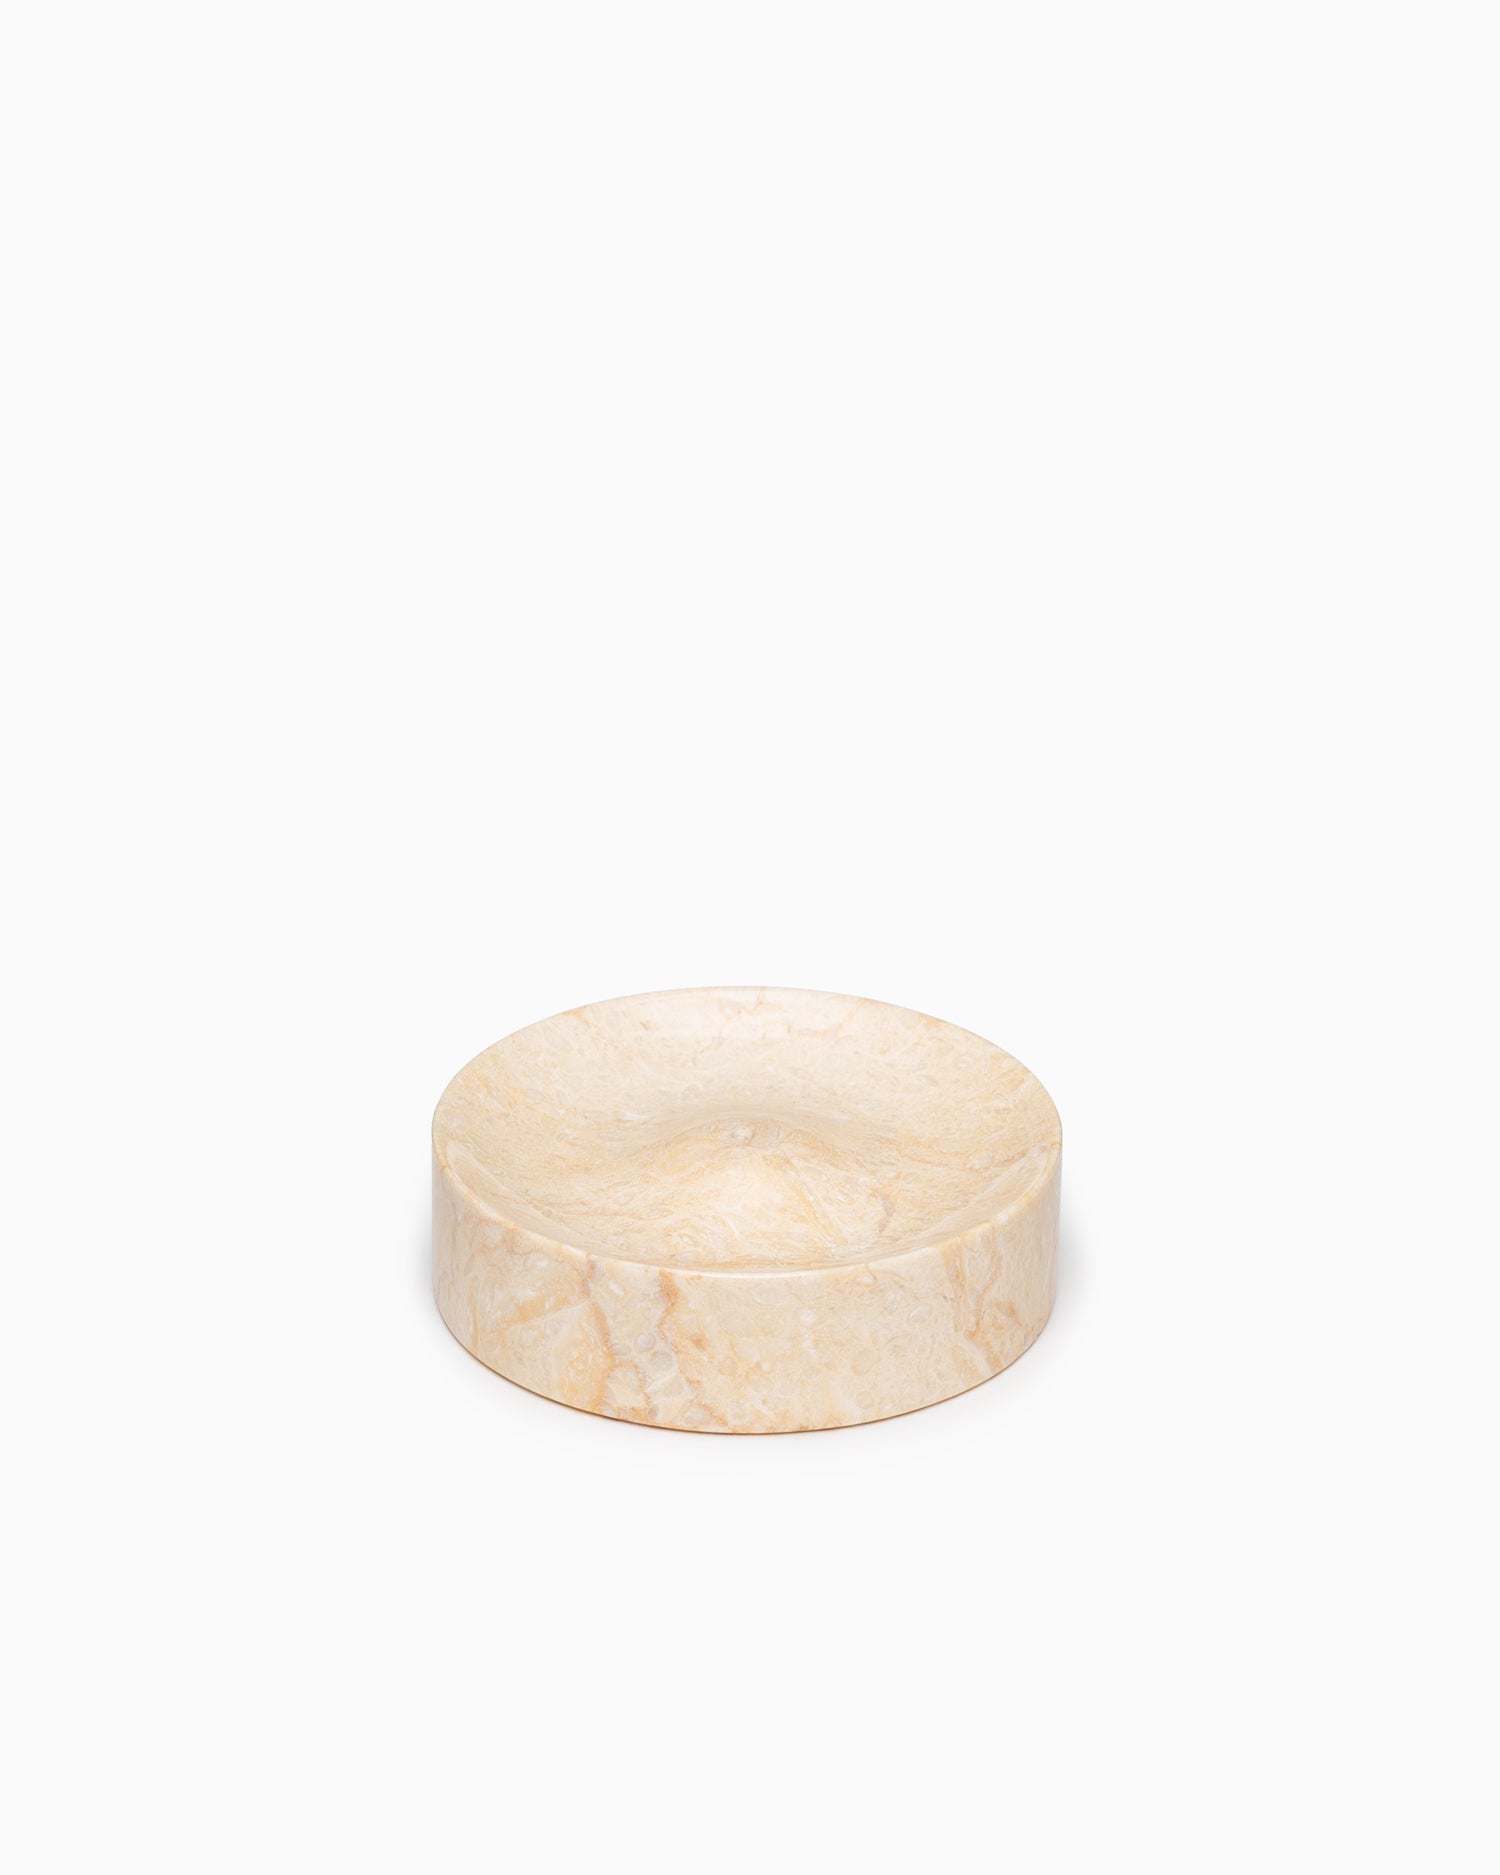 Marble Incense Holder - Cream Marble